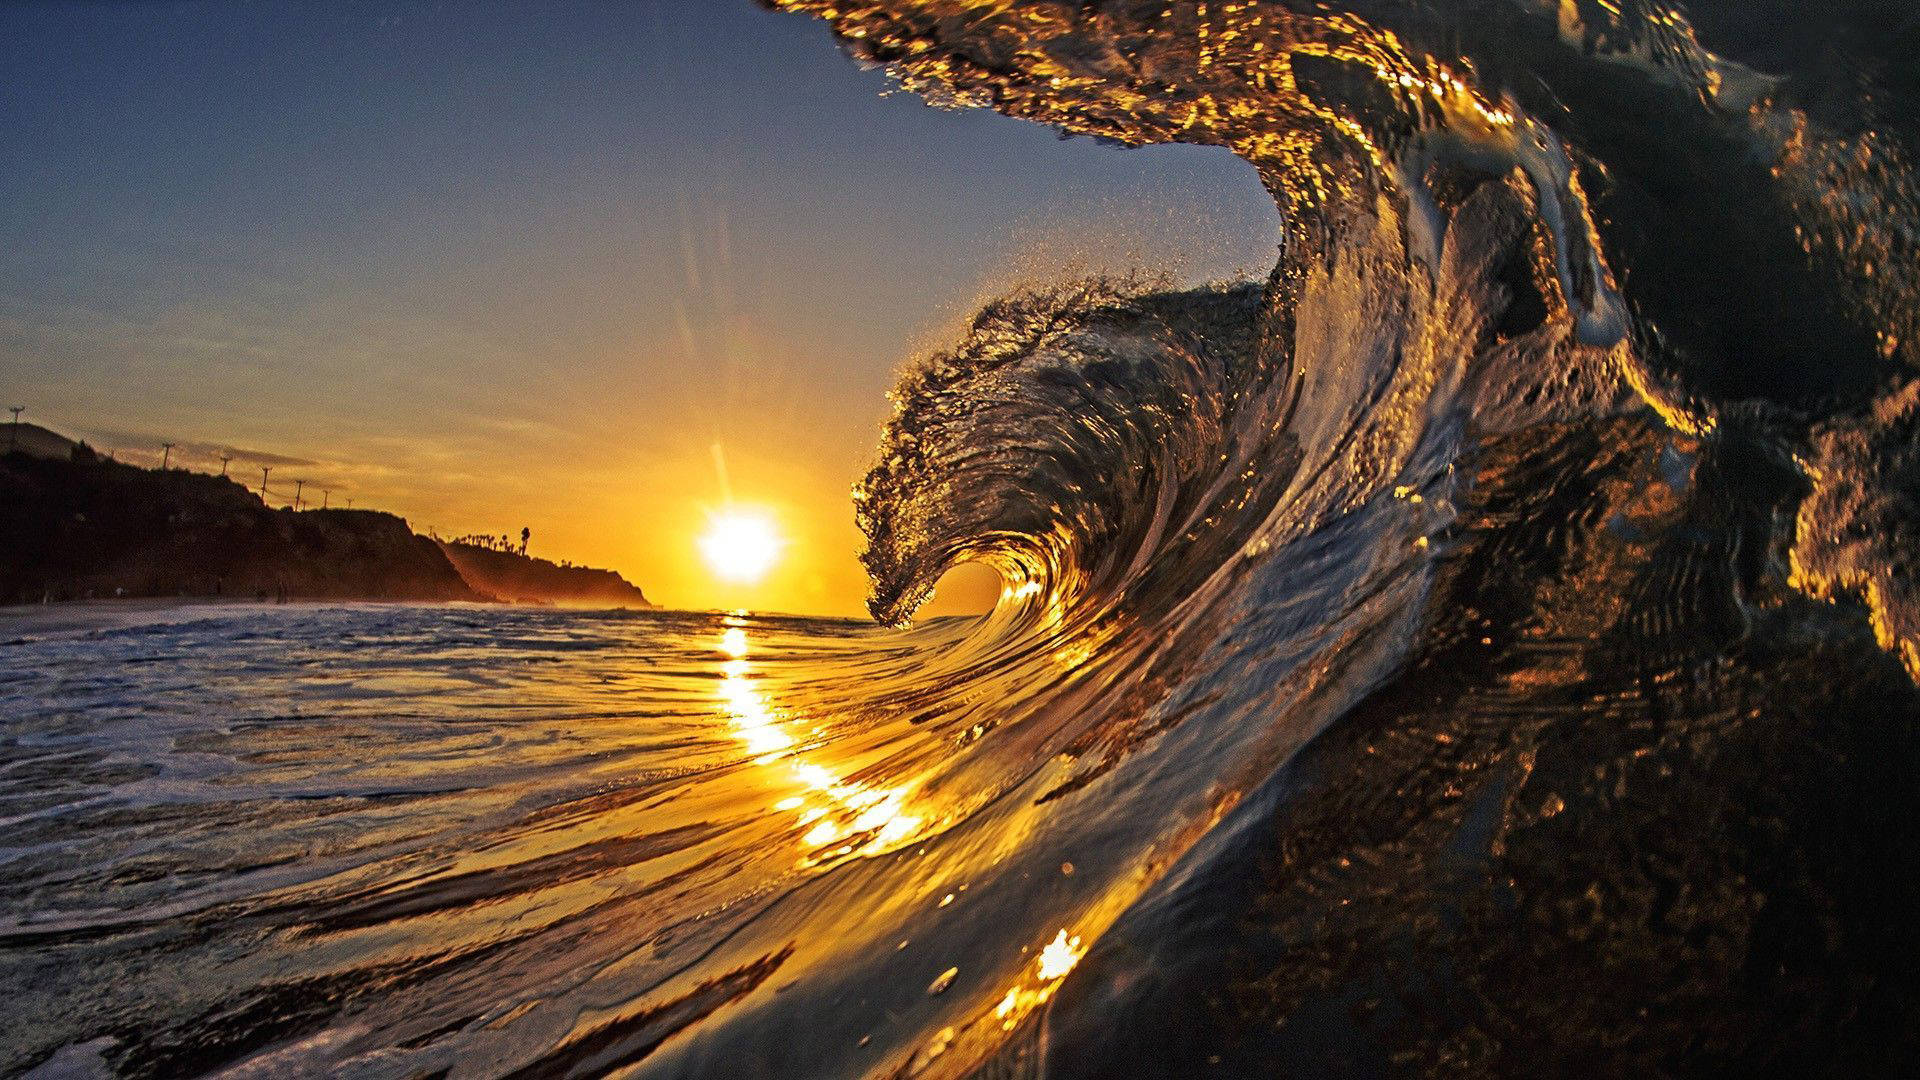 Waves On Beach During Sunset Wallpaper